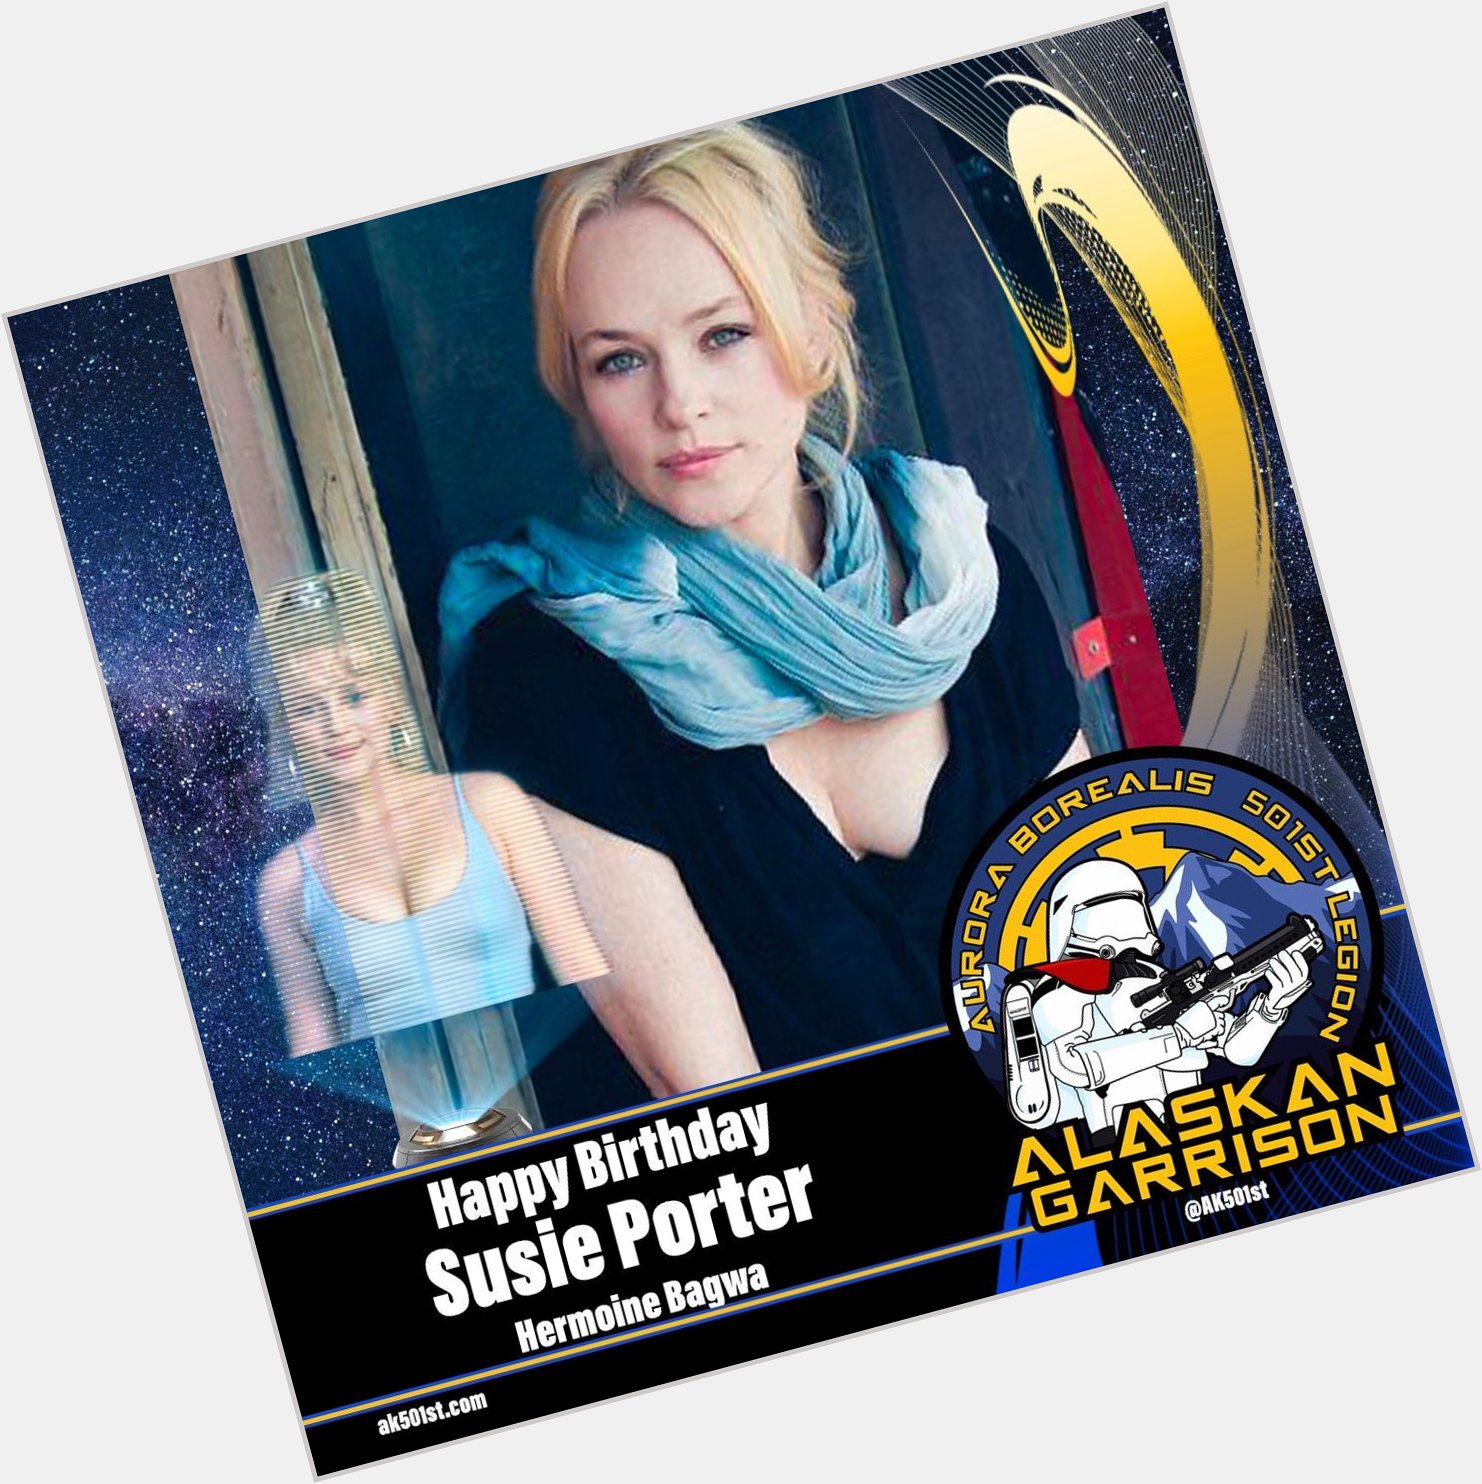 The Alaskan Garrison would like to wish Susie Porter a very happy birthday!   